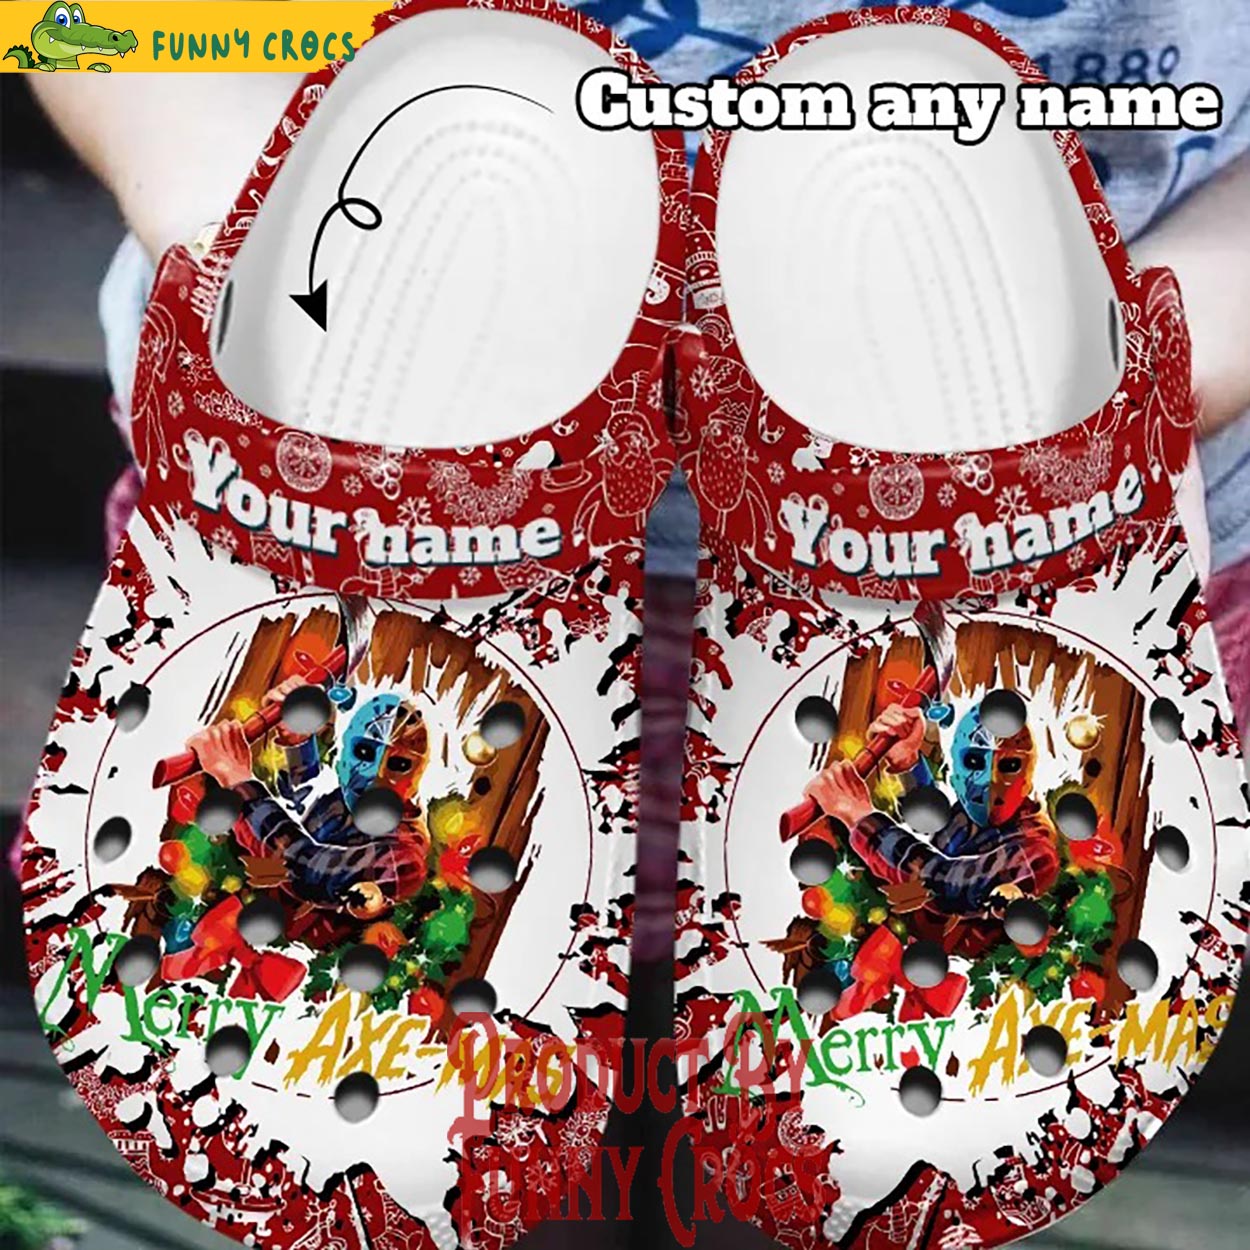 Personalized Jason Merry Axe-Mas Crocs Shoes - Discover Comfort And ...